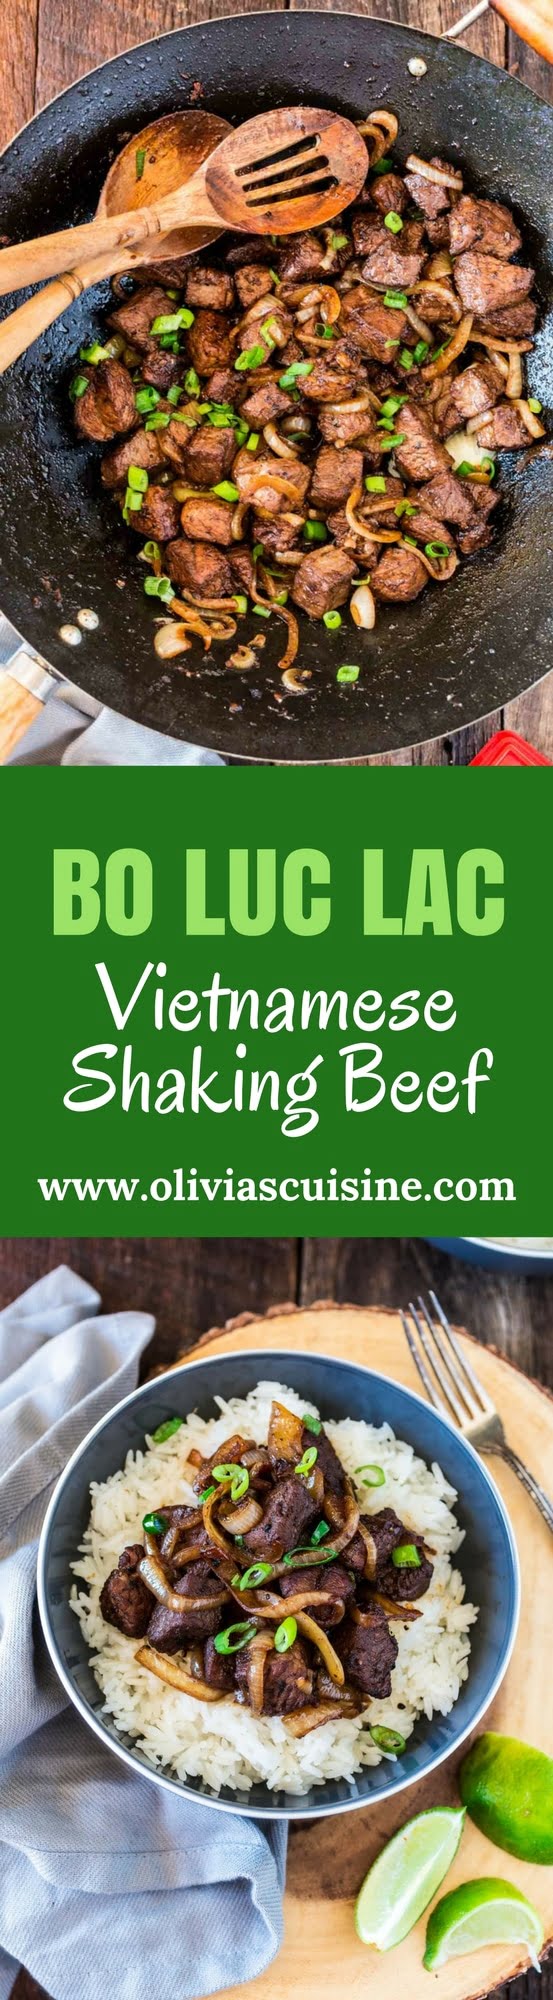 Bo Luc Lac (Vietnamese Shaking Beef) | www.oliviascuisine.com | Bo Luc Lac is a flavorful Vietnamese dish consisting of cubed beef, garlic, soy sauce, lime juice and sliced onions. Quick, convenient and very easy to prep thanks to Dorot! (AD)